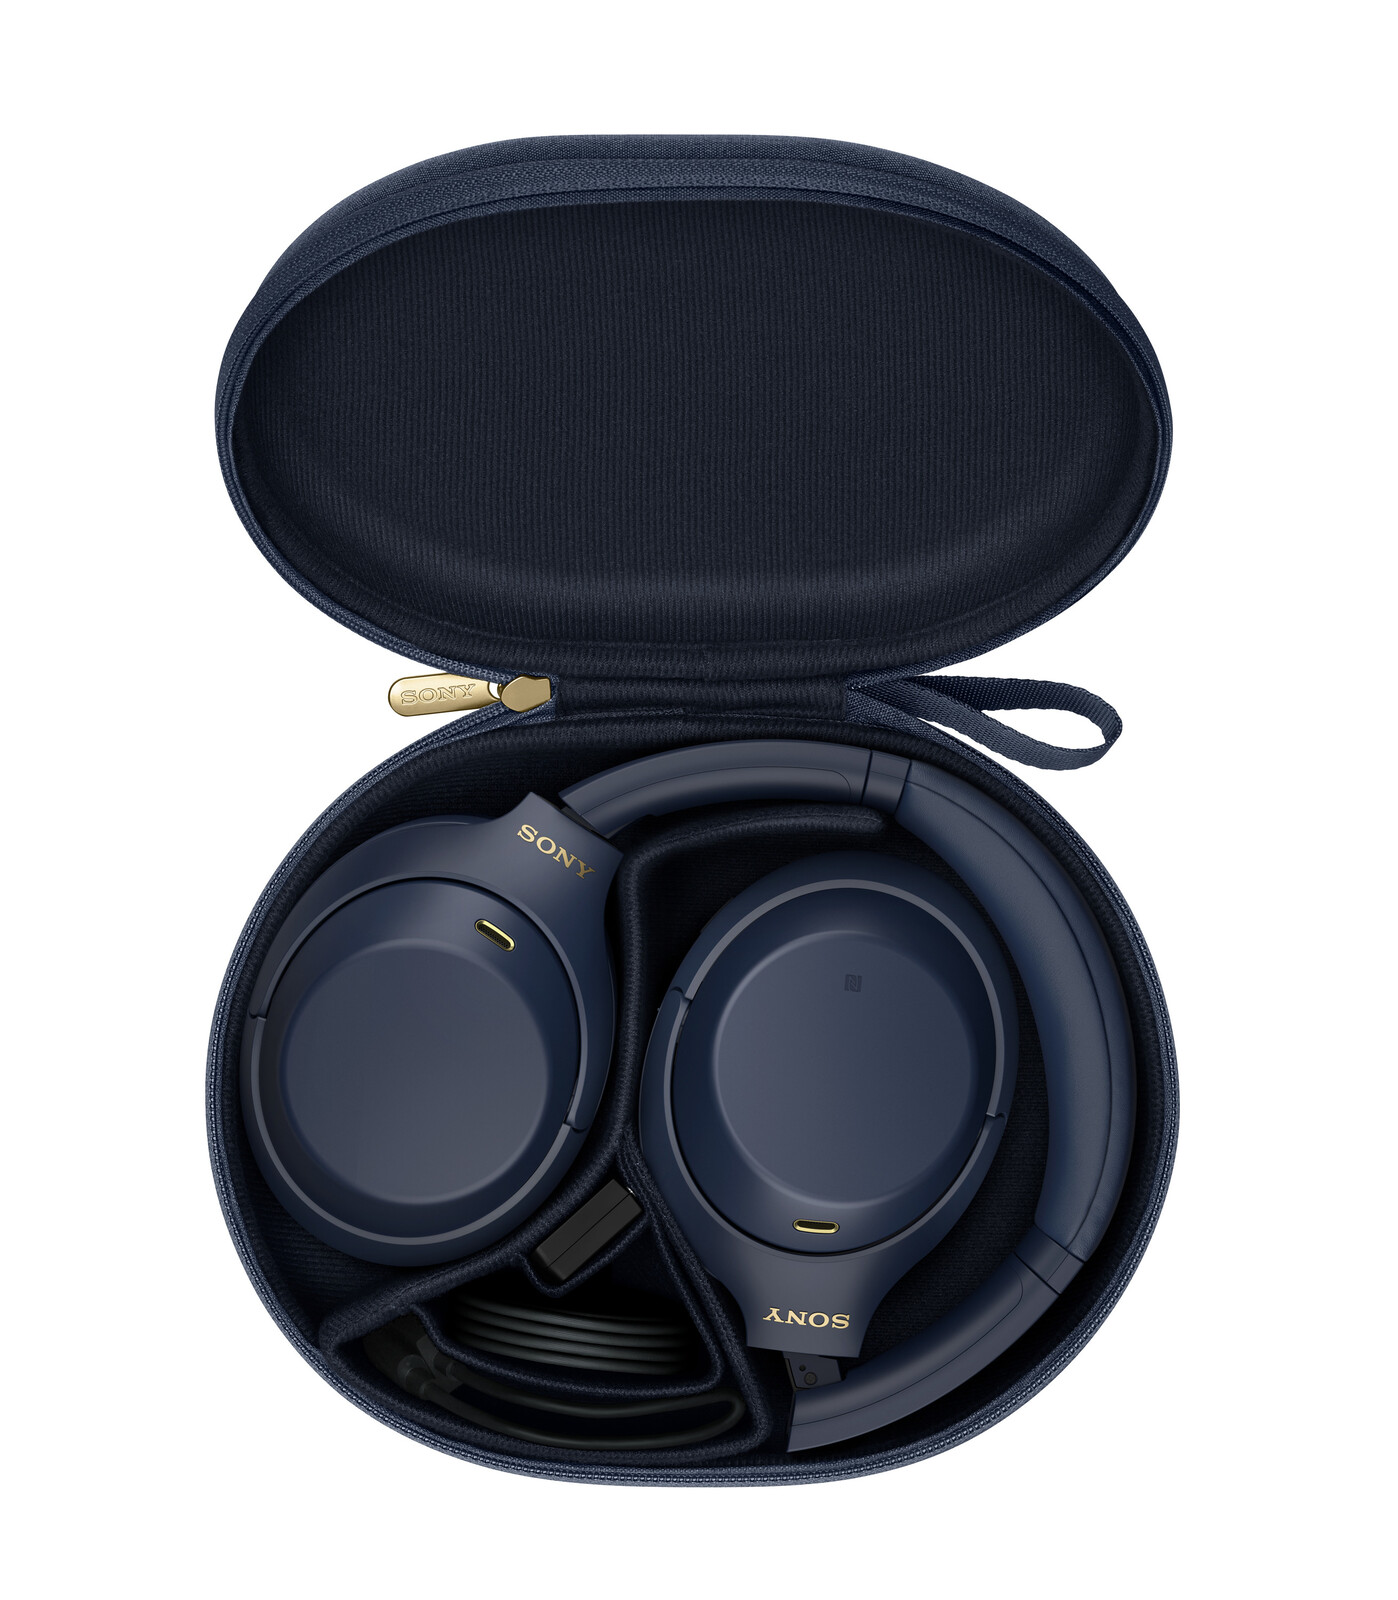 Sony refreshes the WH-1000XM4 in a Midnight Blue colourway